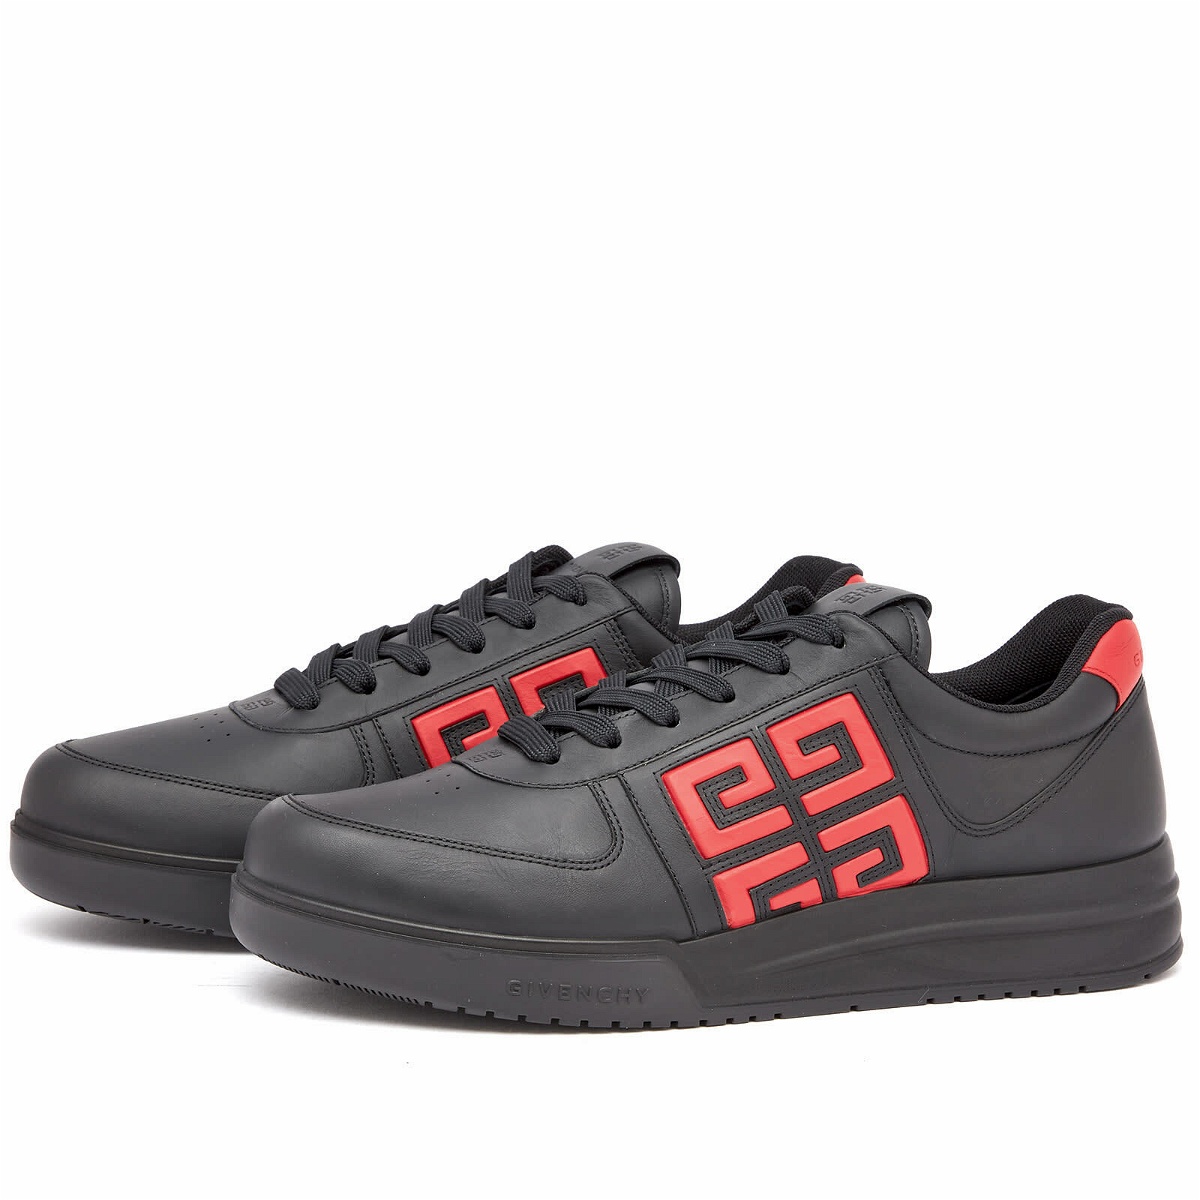 Givenchy Men's G4 Low Top Sneakers in Black/Red Givenchy